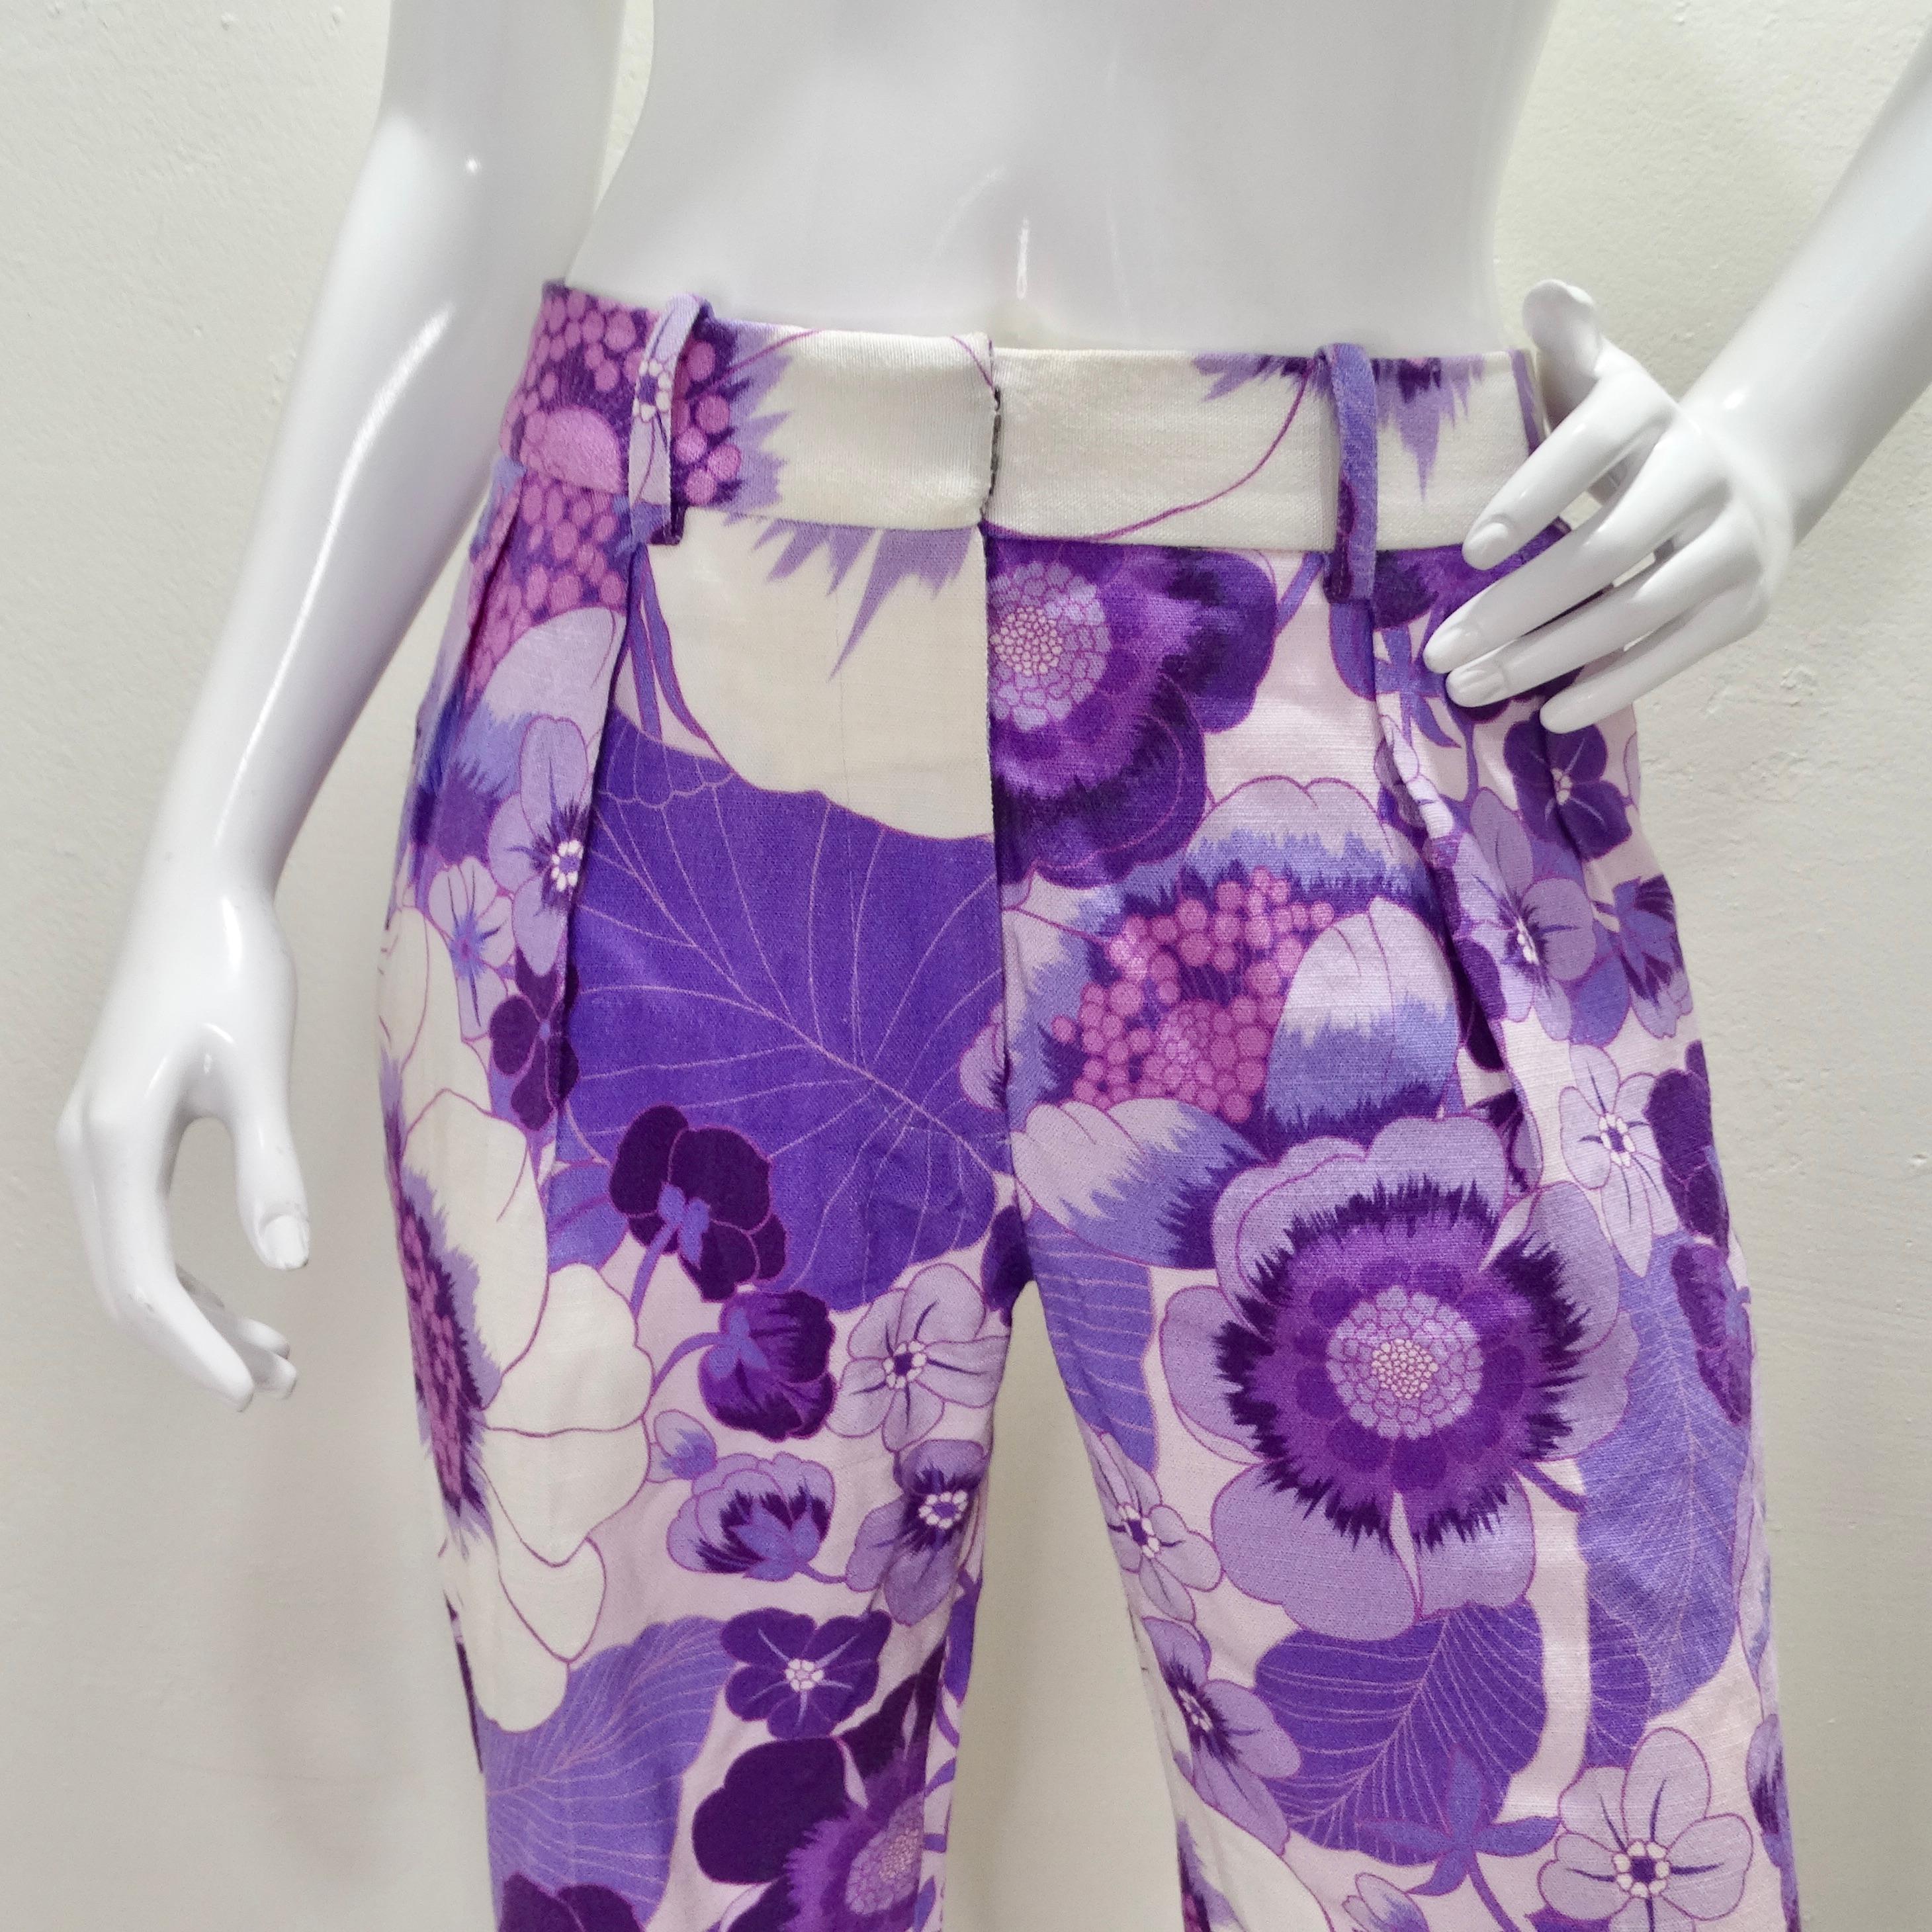 
Introducing the Tom Ford Spring 2021 Purple Floral Print Trousers, a rare and enchanting addition to your wardrobe that effortlessly marries style and comfort. These trousers are adorned with a whimsical and eye-catching purple floral pattern. The